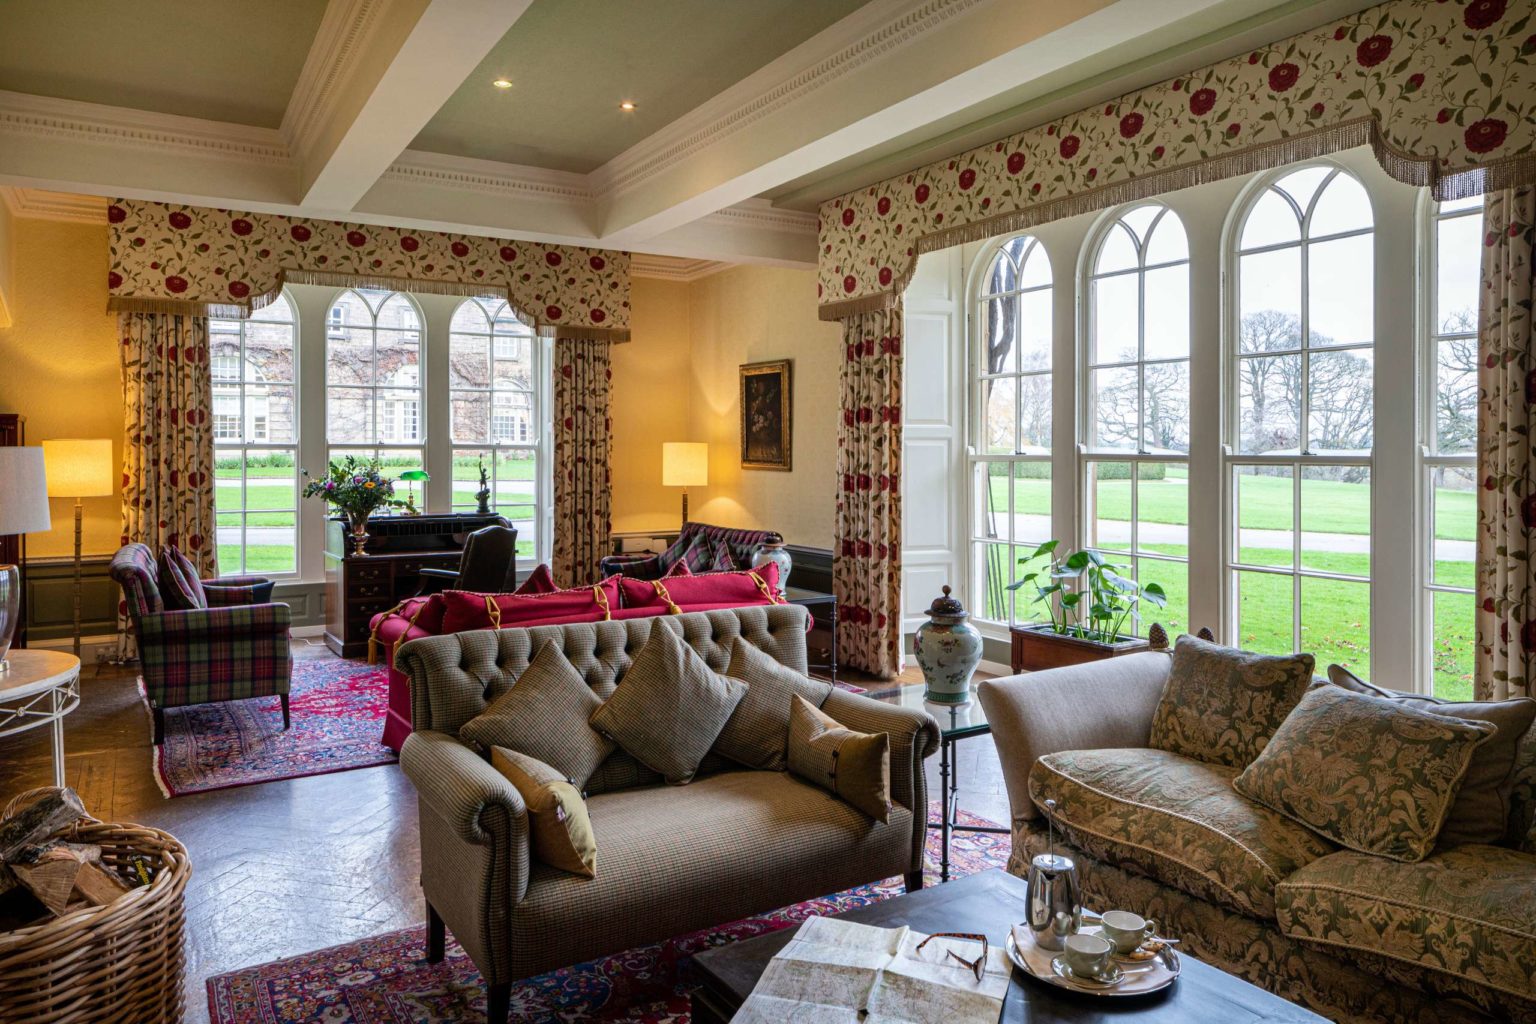 The Morning Room at Swinton Park country estate hotel near Harrogate, Ripon and the Yorkshire Dales